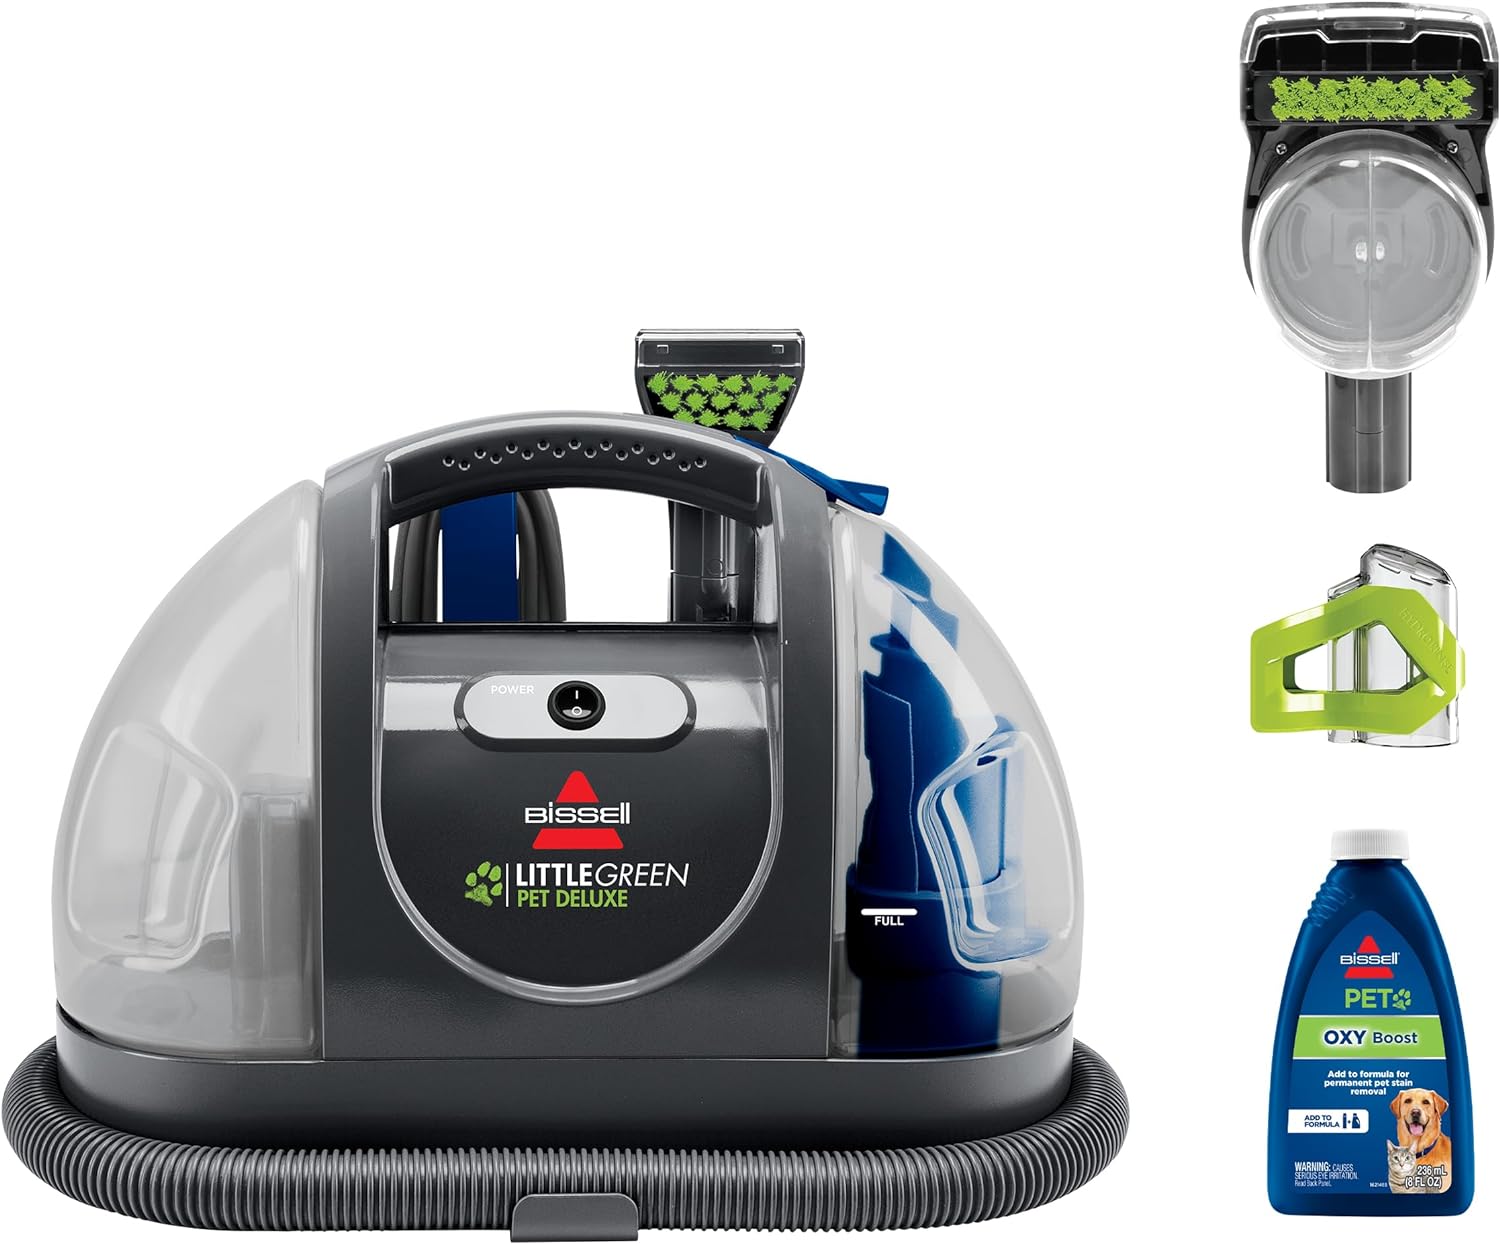 Bissell Little Green Pet Deluxe Portable Carpet Cleaner and Car/Auto Detailer